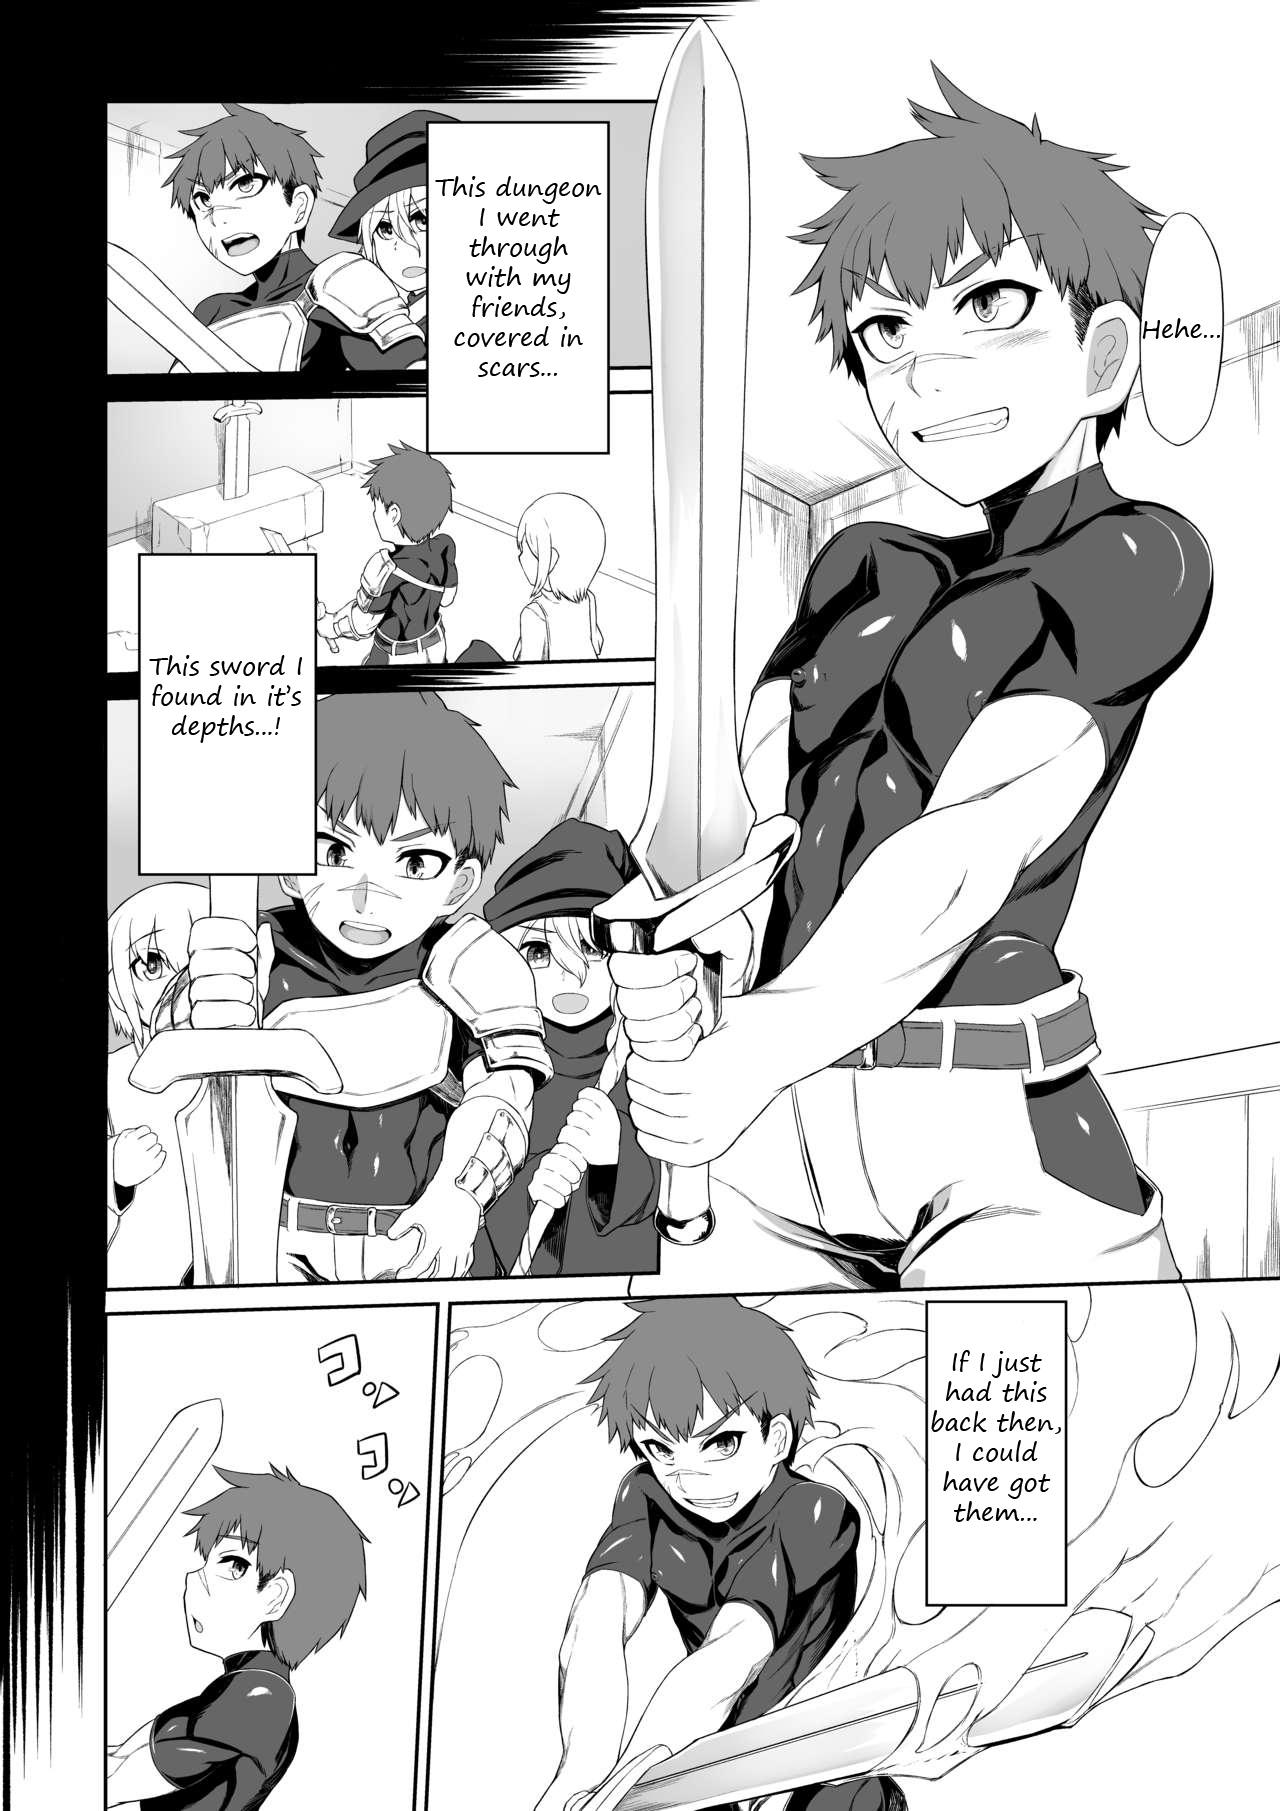 Shecock Futago Succubus to Mahou no Onaho | The Succubus Twins and the Magical Onahole - Original Bwc - Page 4